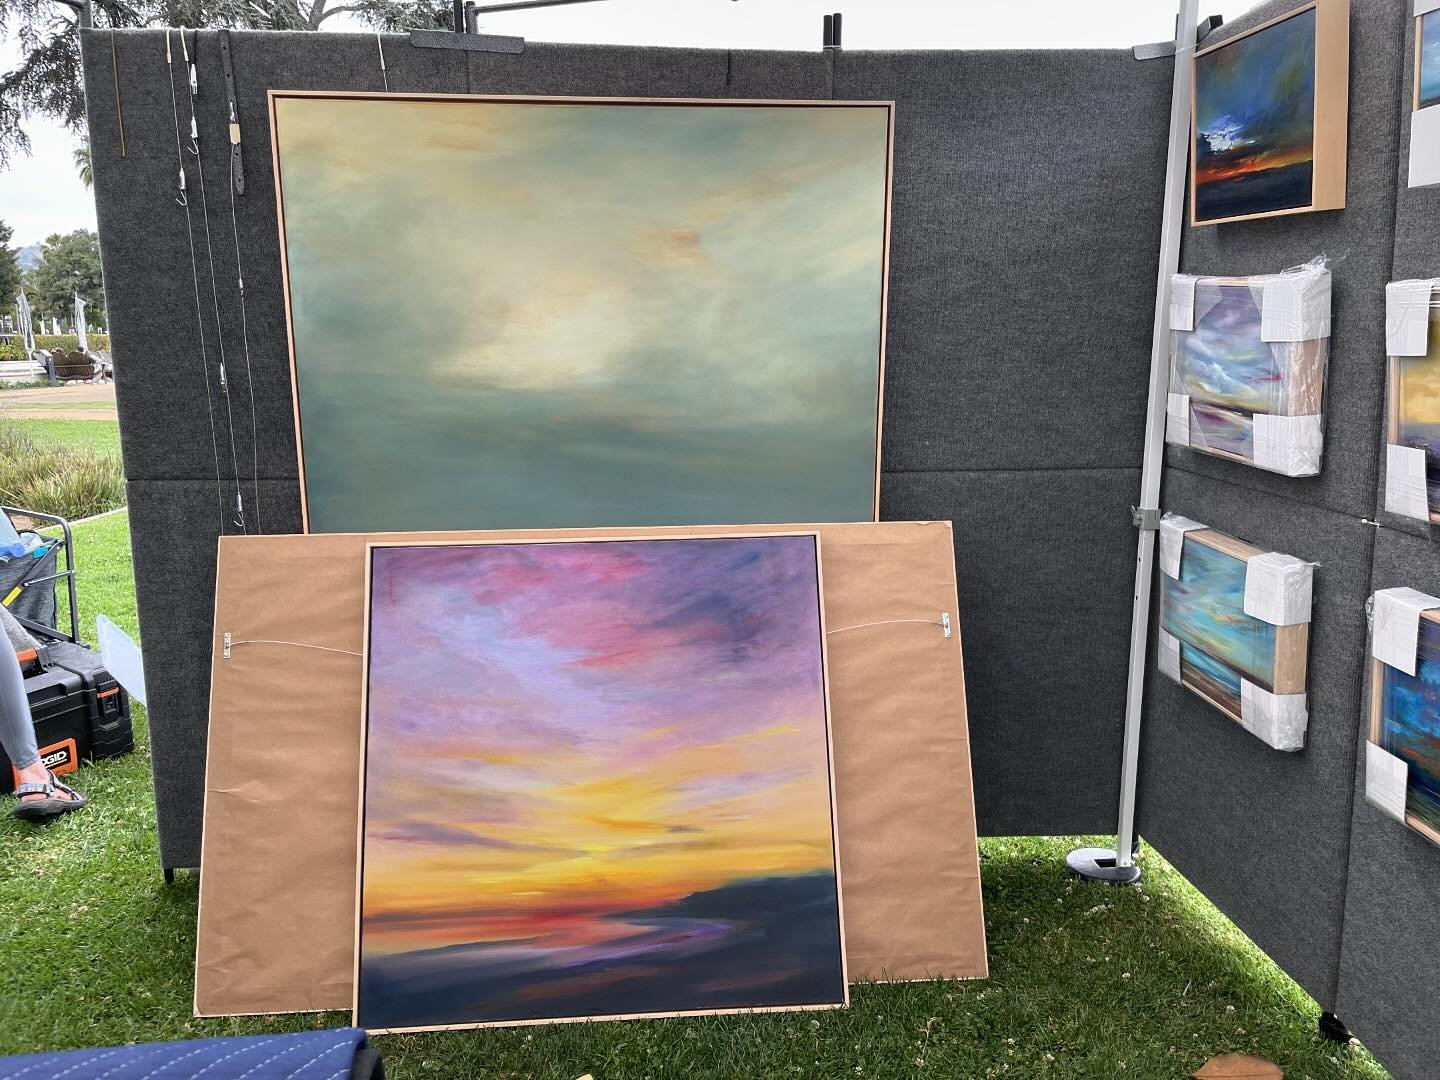 Getting ready for the @bhartshow this weekend, May 18th &amp; 19th. Come by and enjoy fine art, food trucks, and a Wine &amp; Beer Garden.